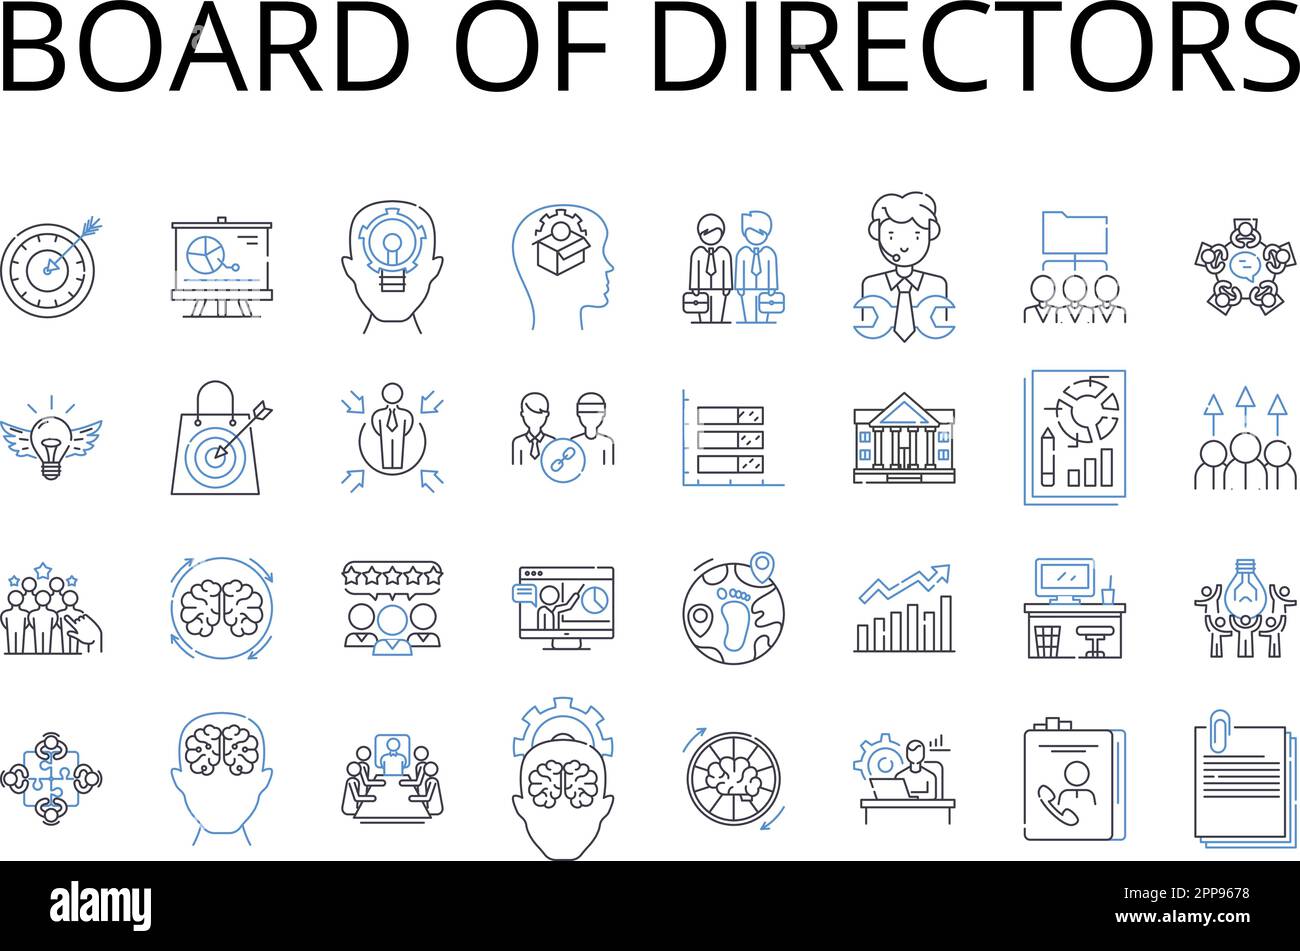 Board of Directors line icons collection. Executive Committee, Management Team, Advisory Board, Steering Group, Leadership Council, Senior Staff Stock Vector